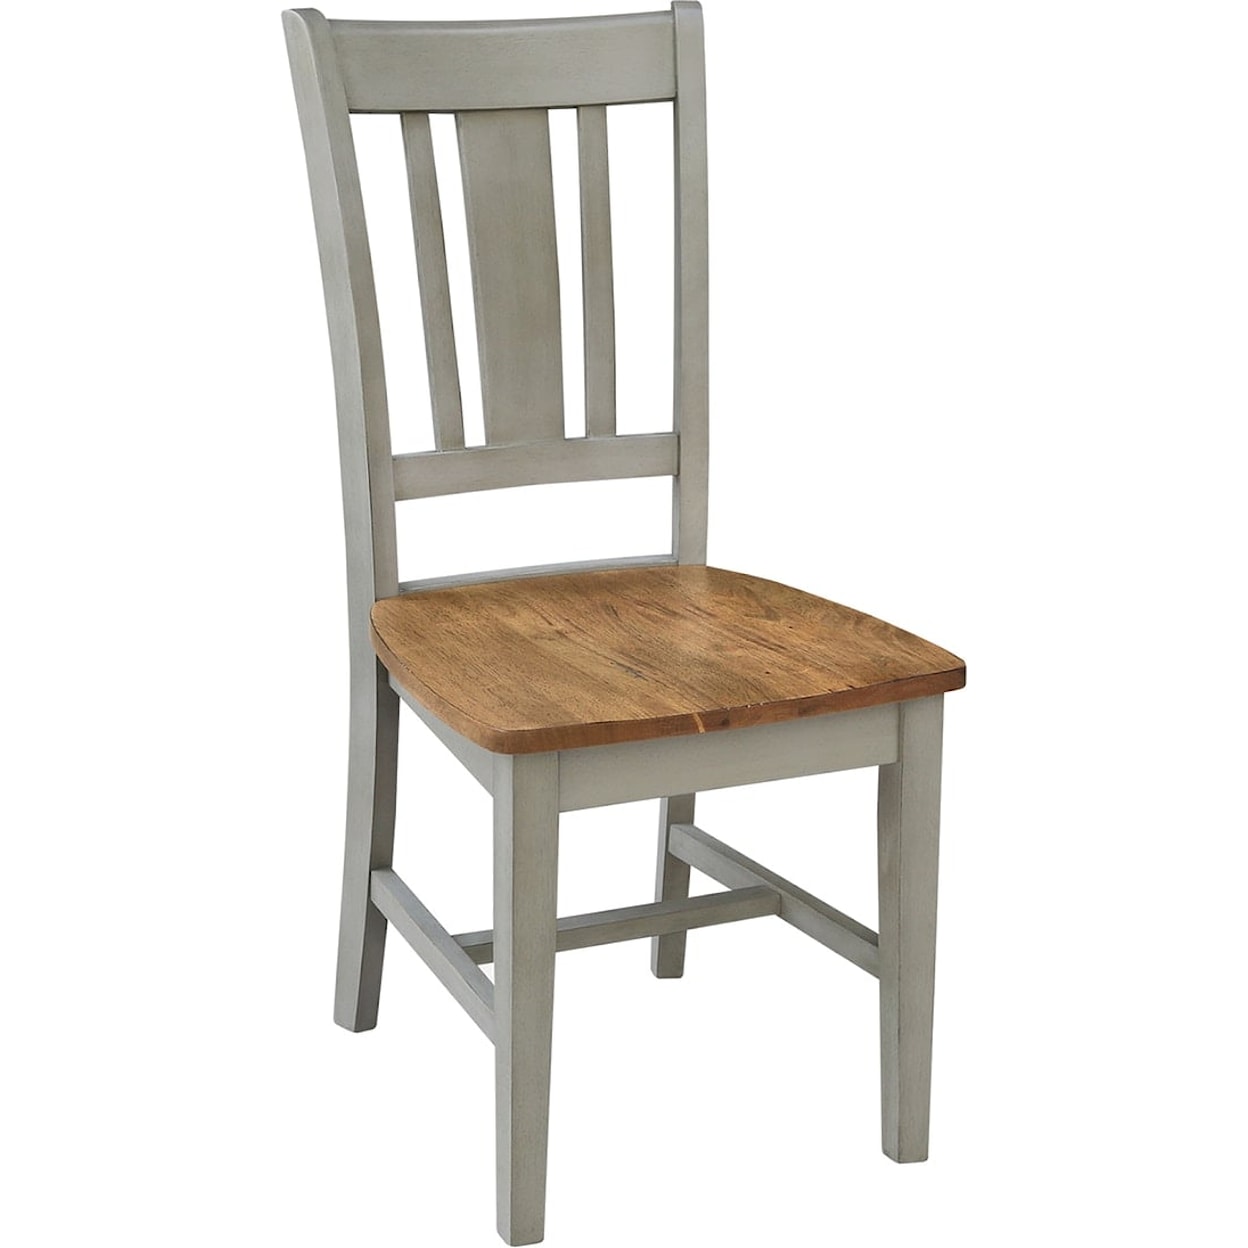 John Thomas Dining Essentials San Remo Chair in Hickory / Stone